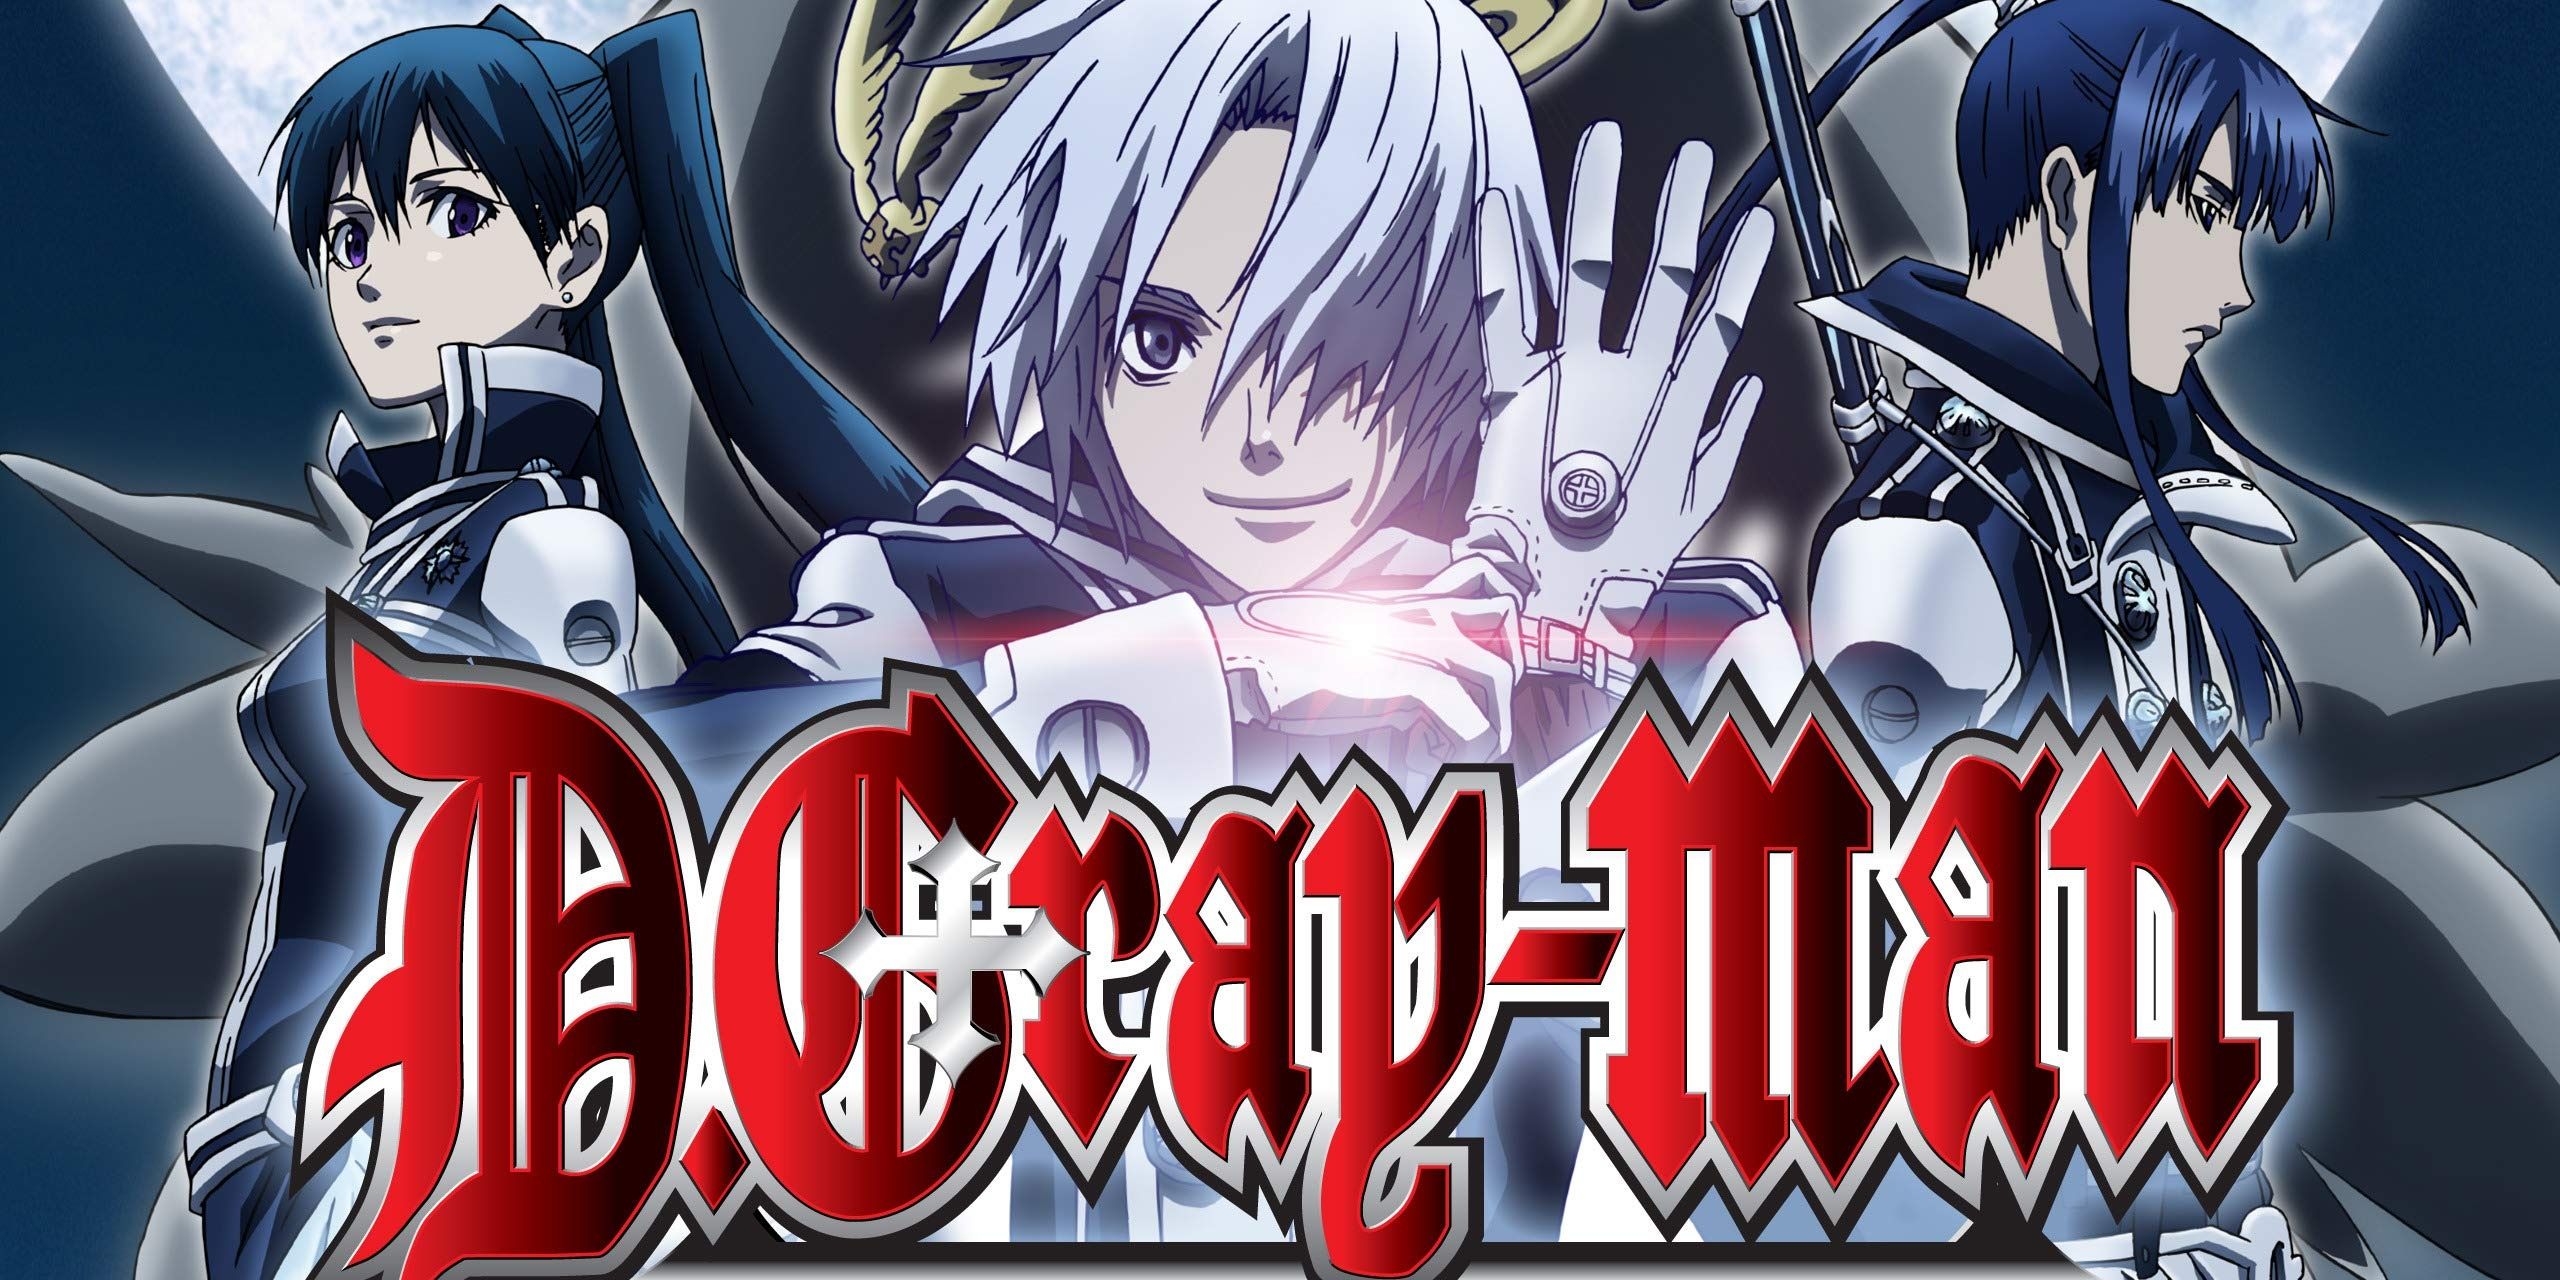 Promotional image for the D Gray Man anime series